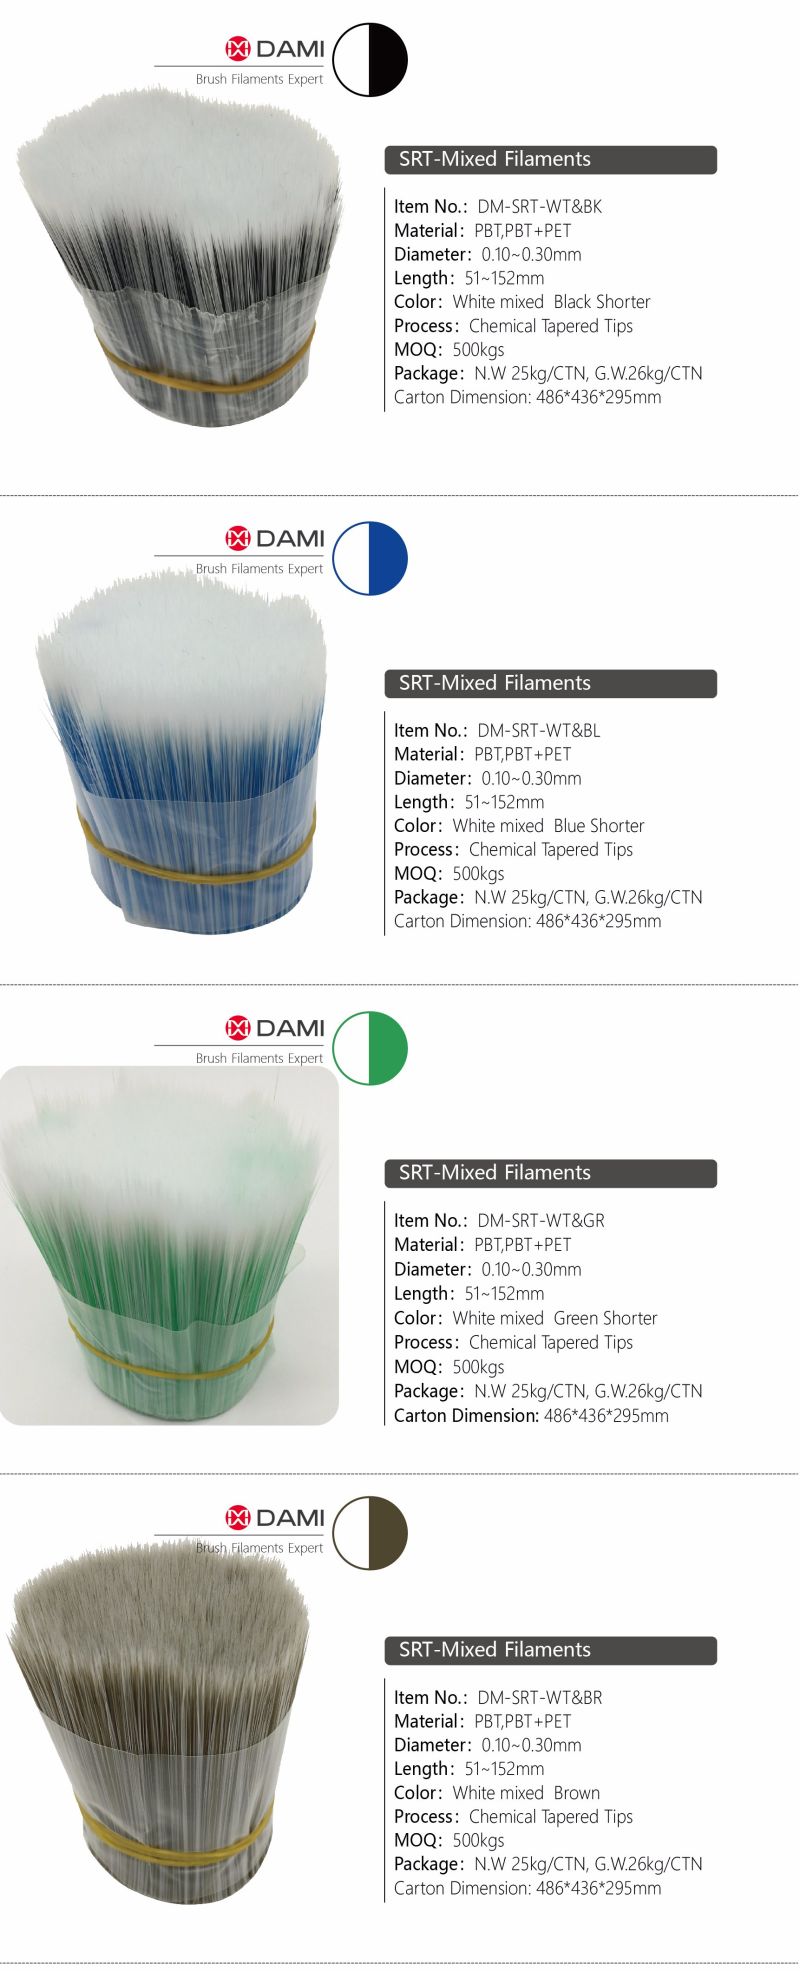 White and Brown Mixed PBT Sollid Tapered Filaments for Paint Brushes